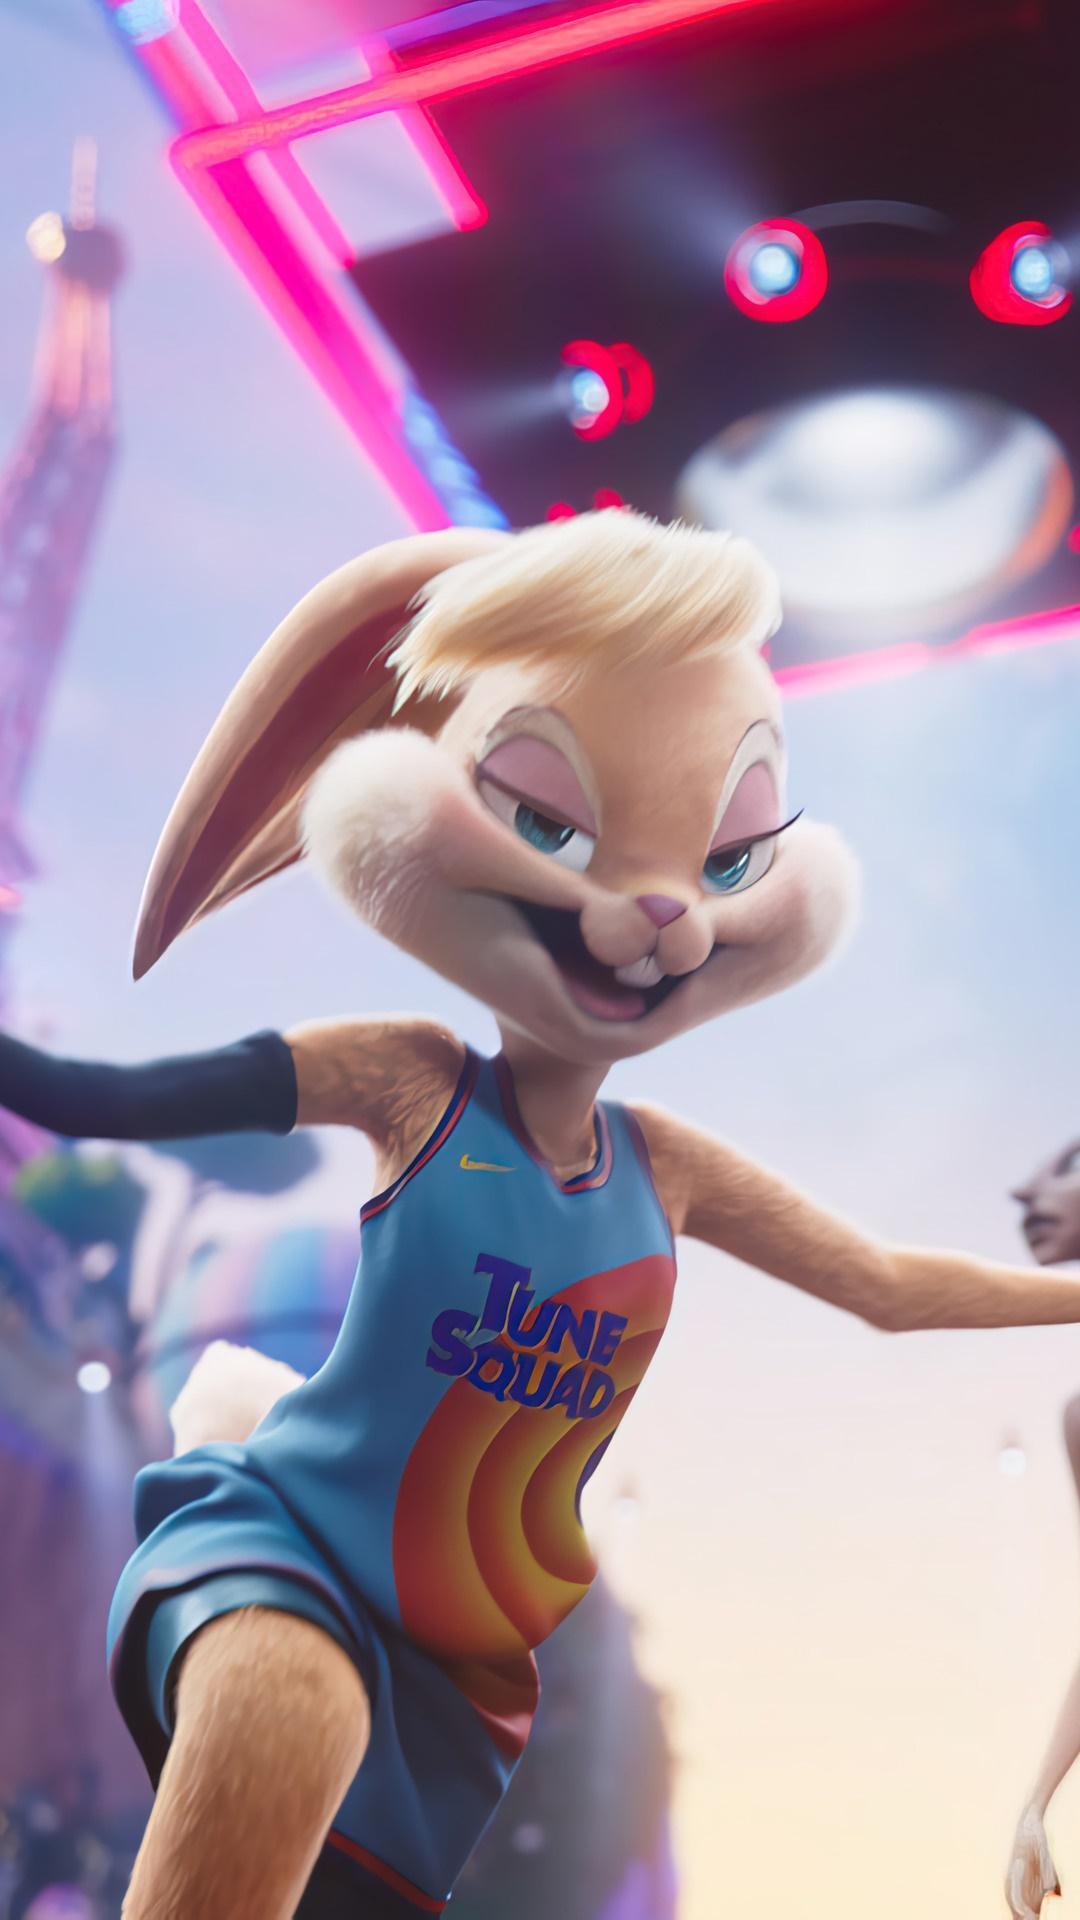 HD wallpaper, Space Jam 2, Movie, Space Jam A New Legacy, Lola Bunny